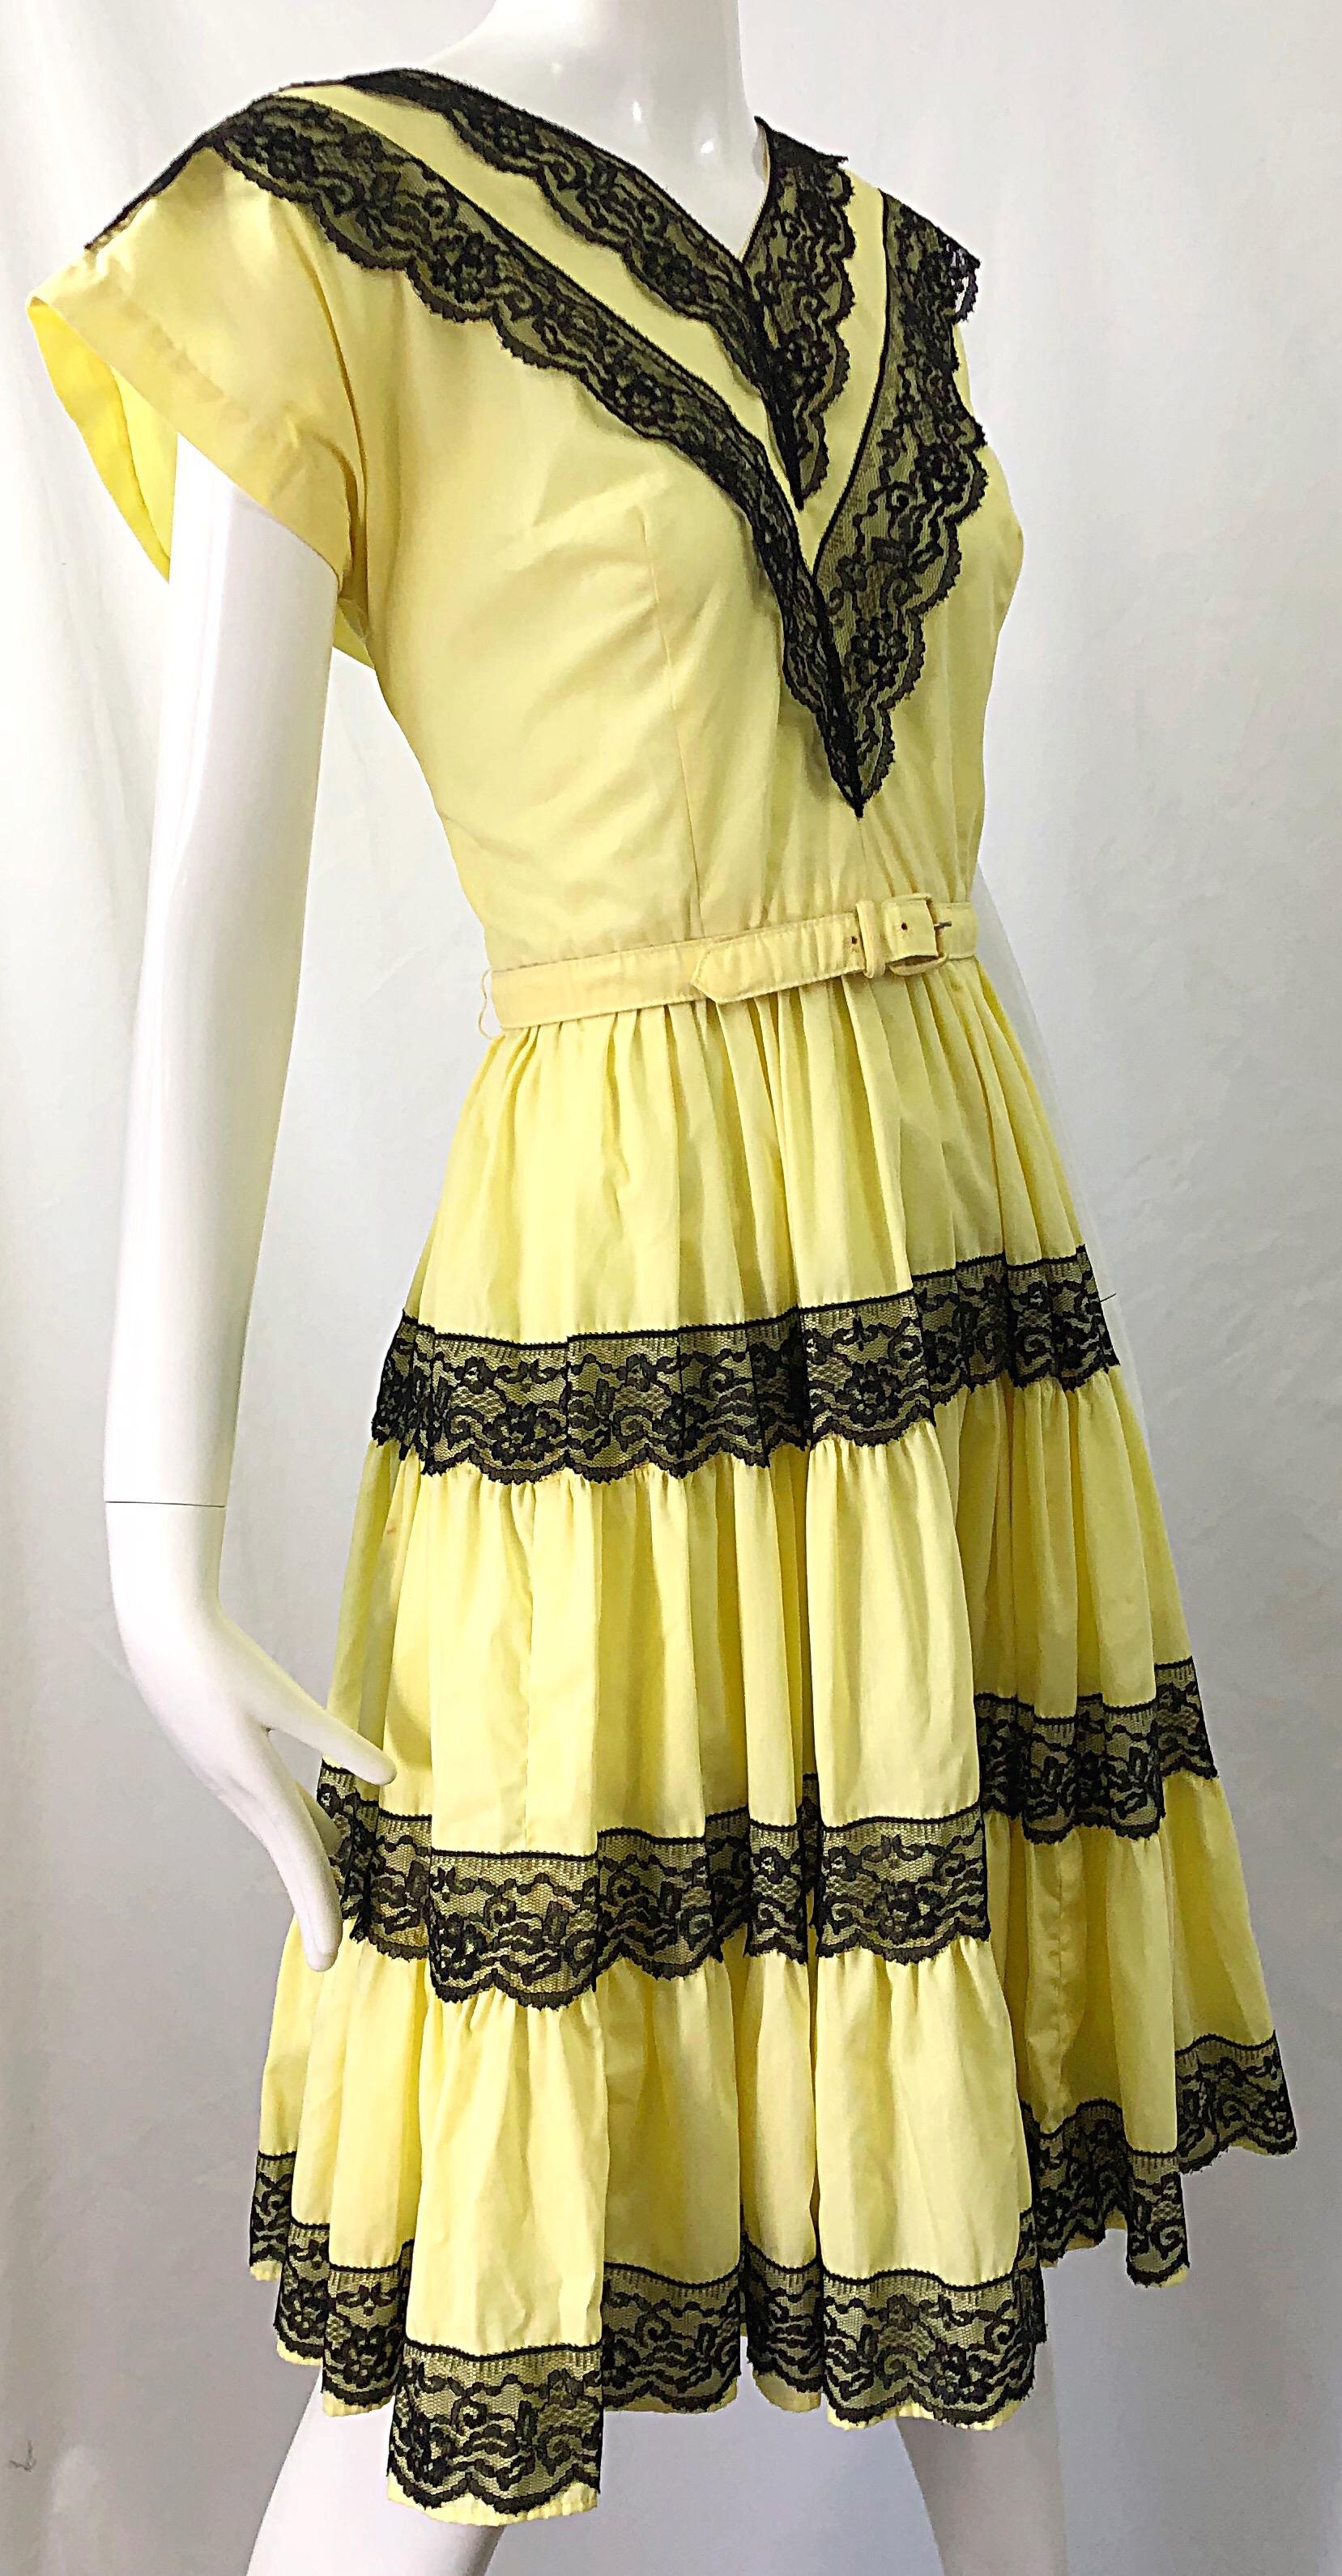 1950s Bettina of Miami Yellow + Black Cotton Lace Fit n' Flare Vintage 50s Dress For Sale 1